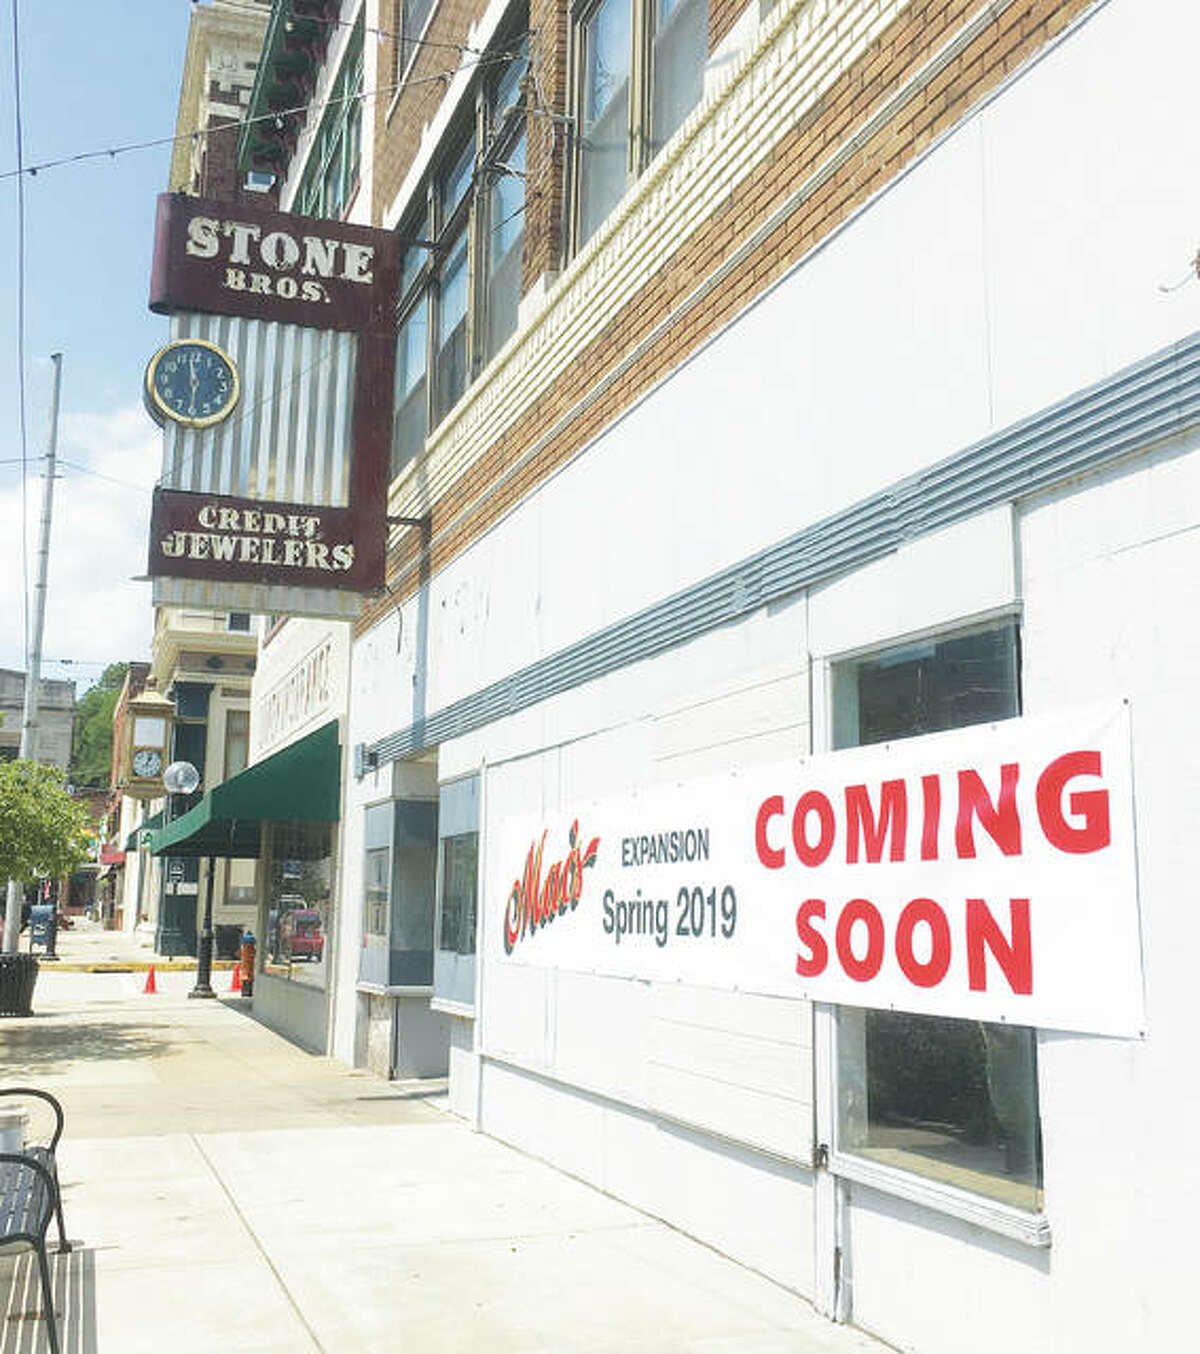 Alton businessman Mac Lenhardt told The Telegraph that he recently closed on a three-story/three-storefront commercial building at 114 W. Third St. in historic Downtown Alton, to open an expanded Mac’s Downtown Alton next spring. The building is located around the corner from his current business at 315 Belle St. The new space will be connected internally to the existing space.